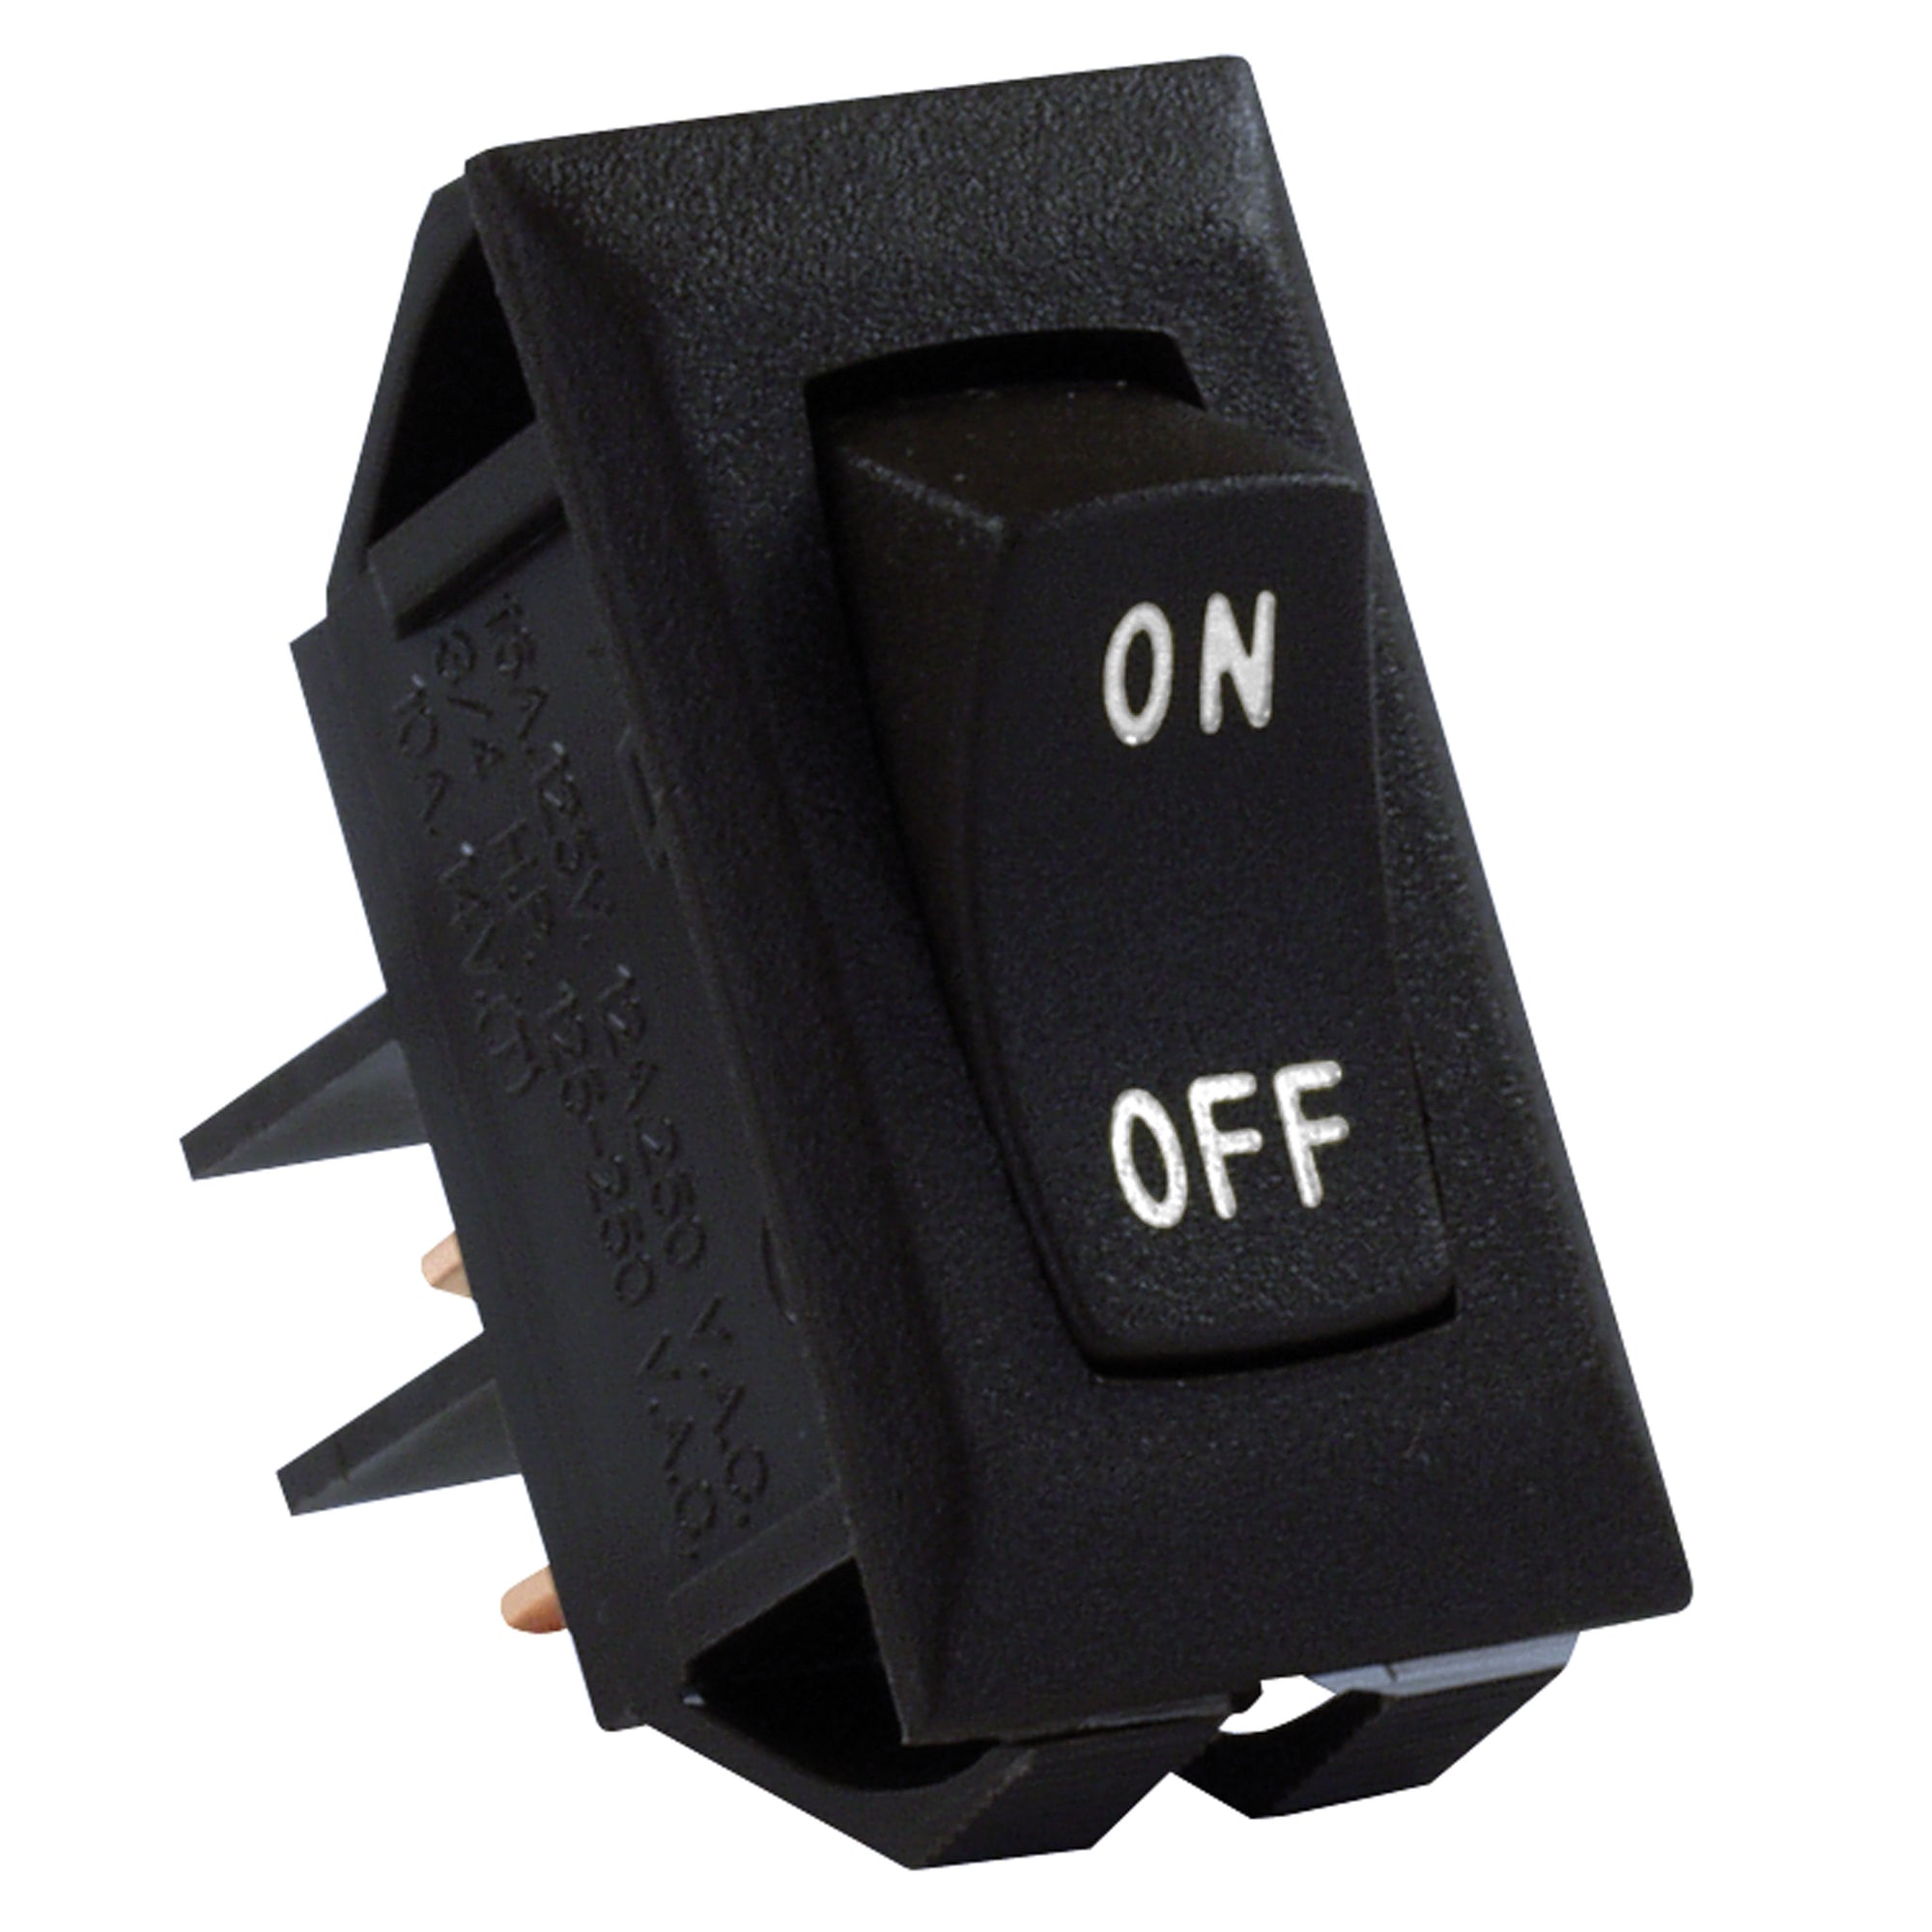 JR Products 12591-5 Labeled On/Off Switches, Pack of 5 - Black